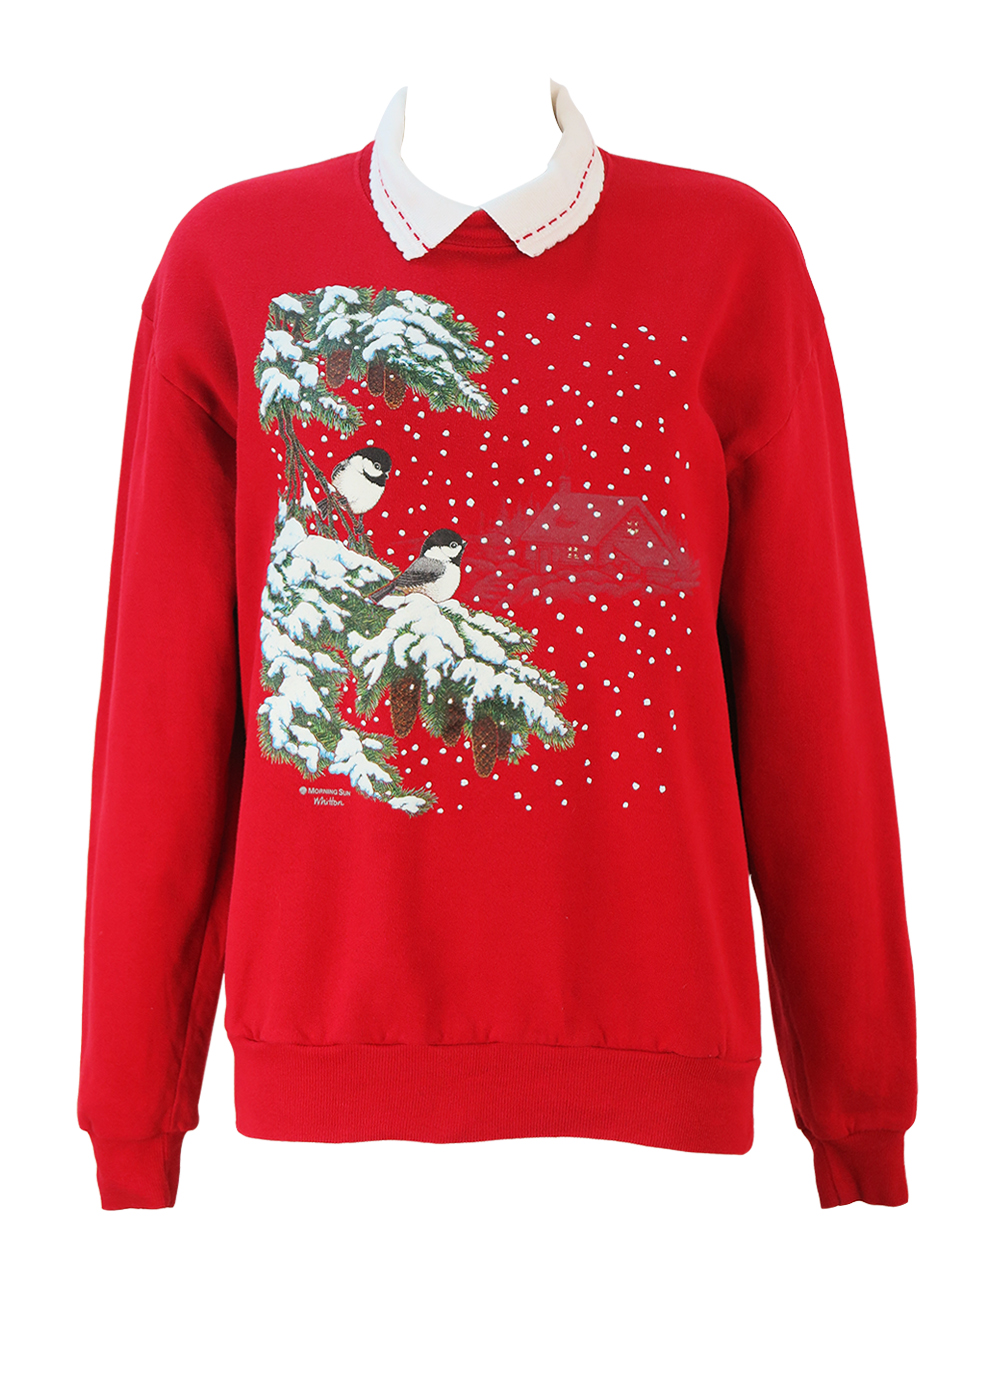 Red Christmas Sweatshirt with Birds & Snowflakes Imagery & White Collar ...